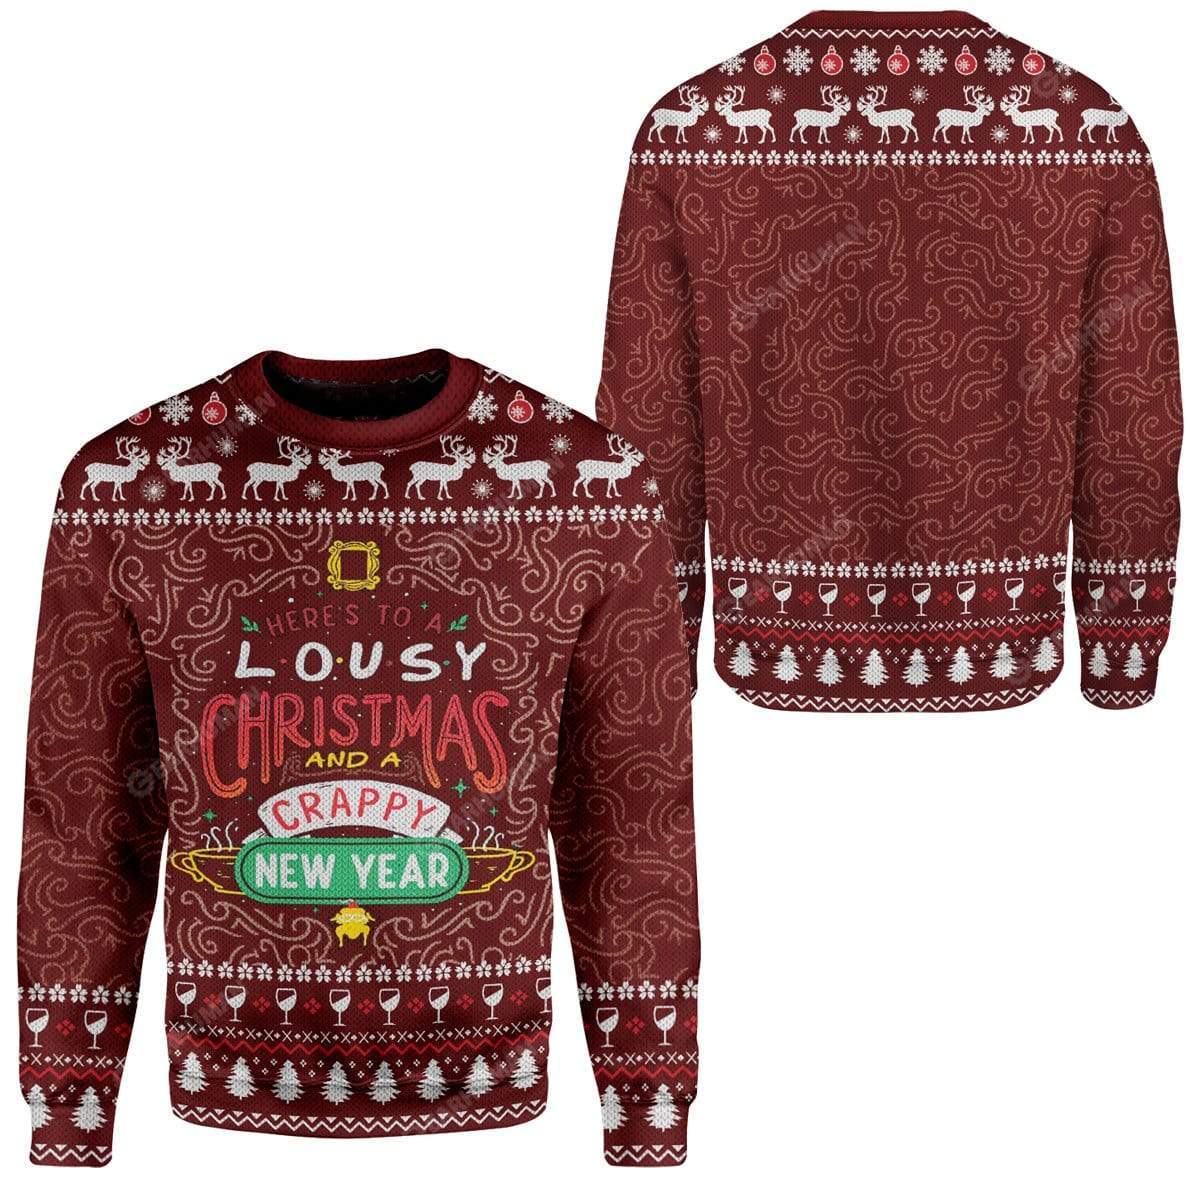 Ugly Christmas Friends Custom Sweater Apparel HD-DT13111911 Ugly Christmas Sweater 